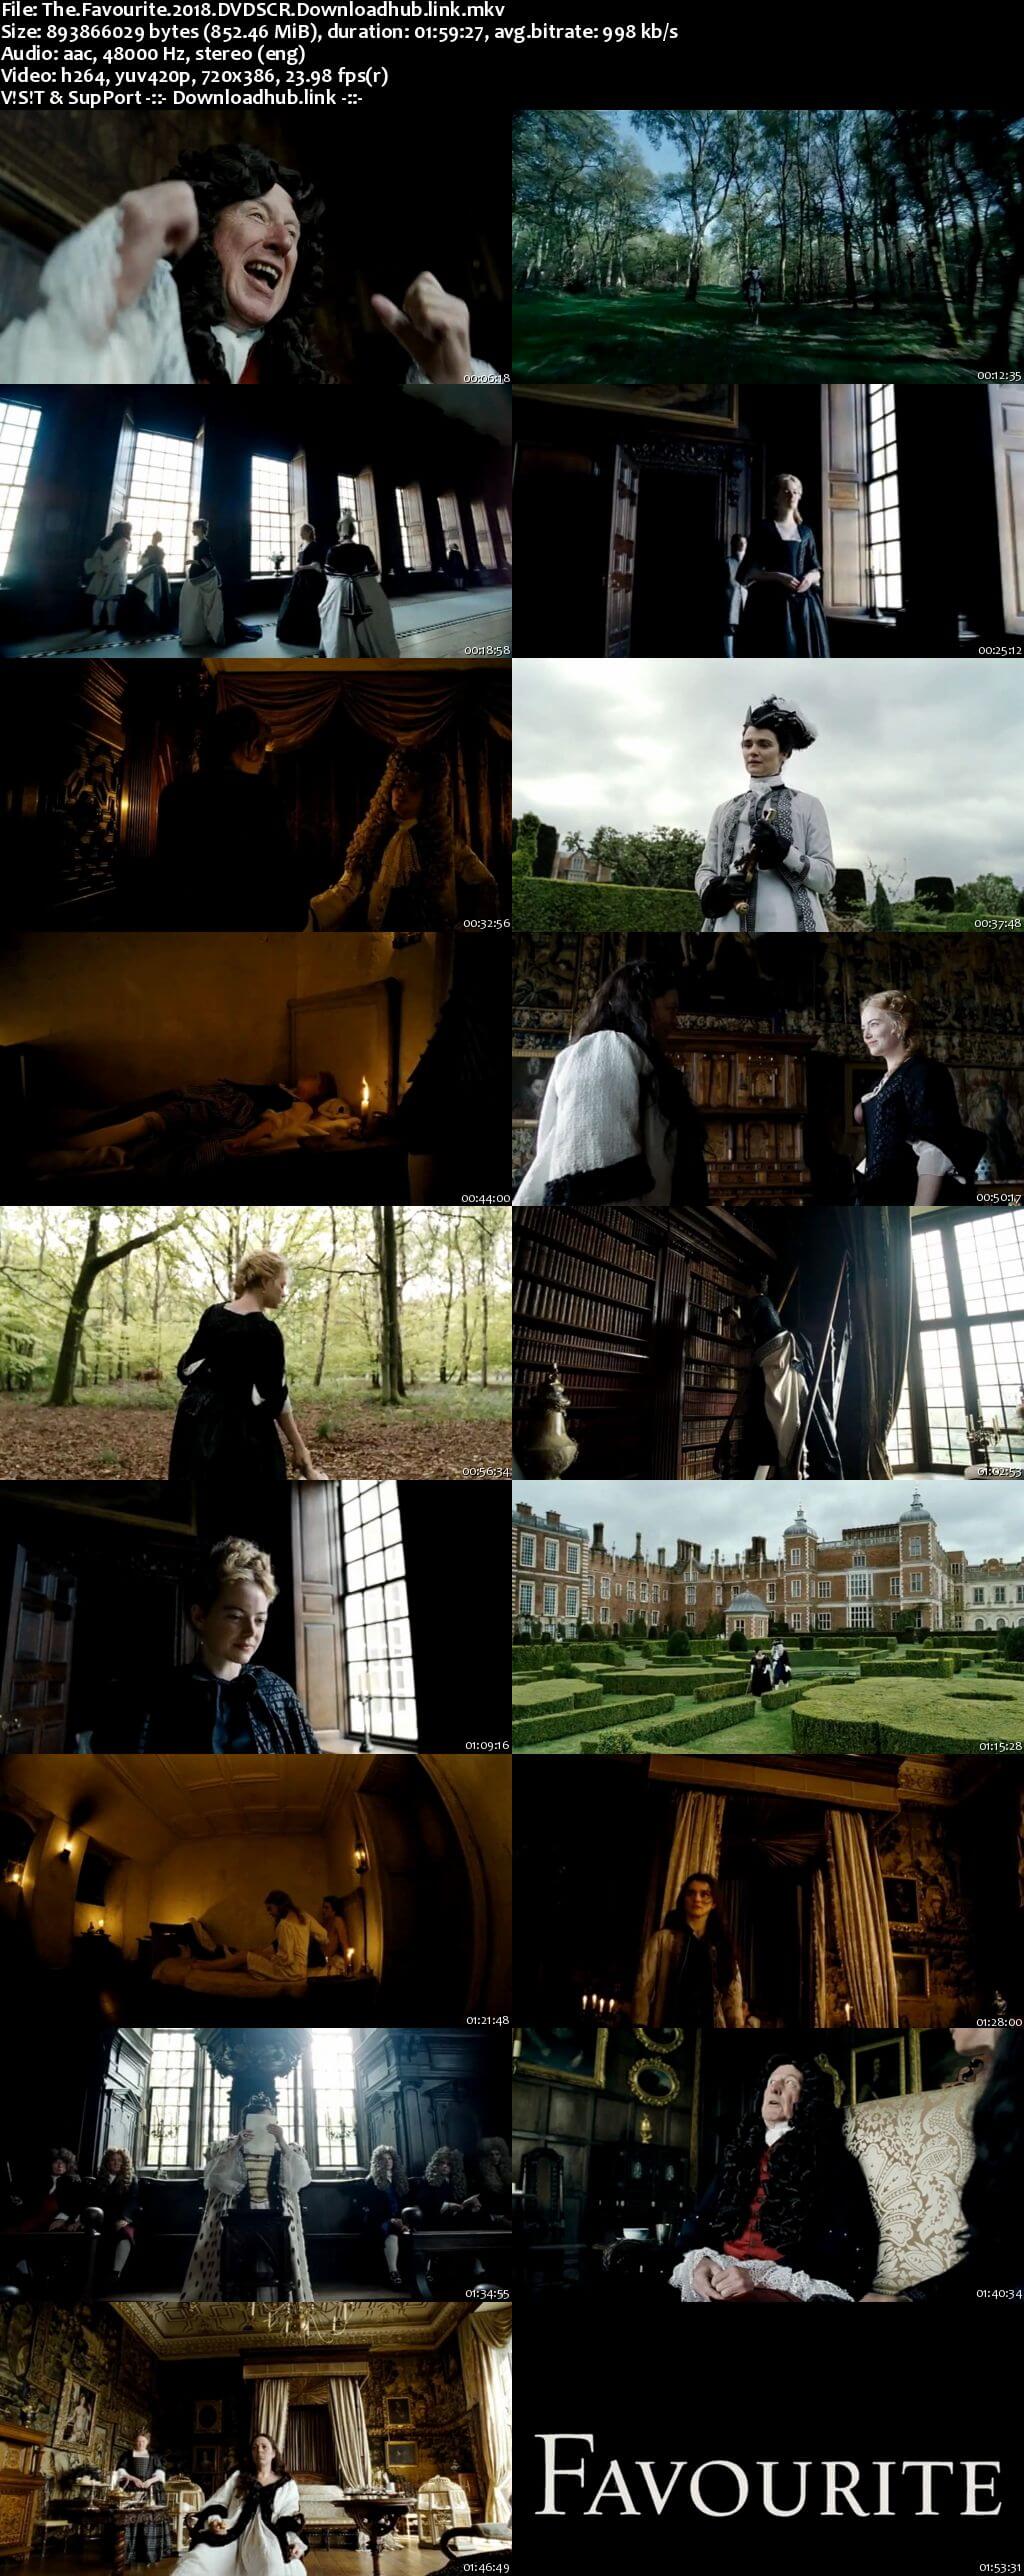 The Favourite 2018 English 850MB DVDScr x264